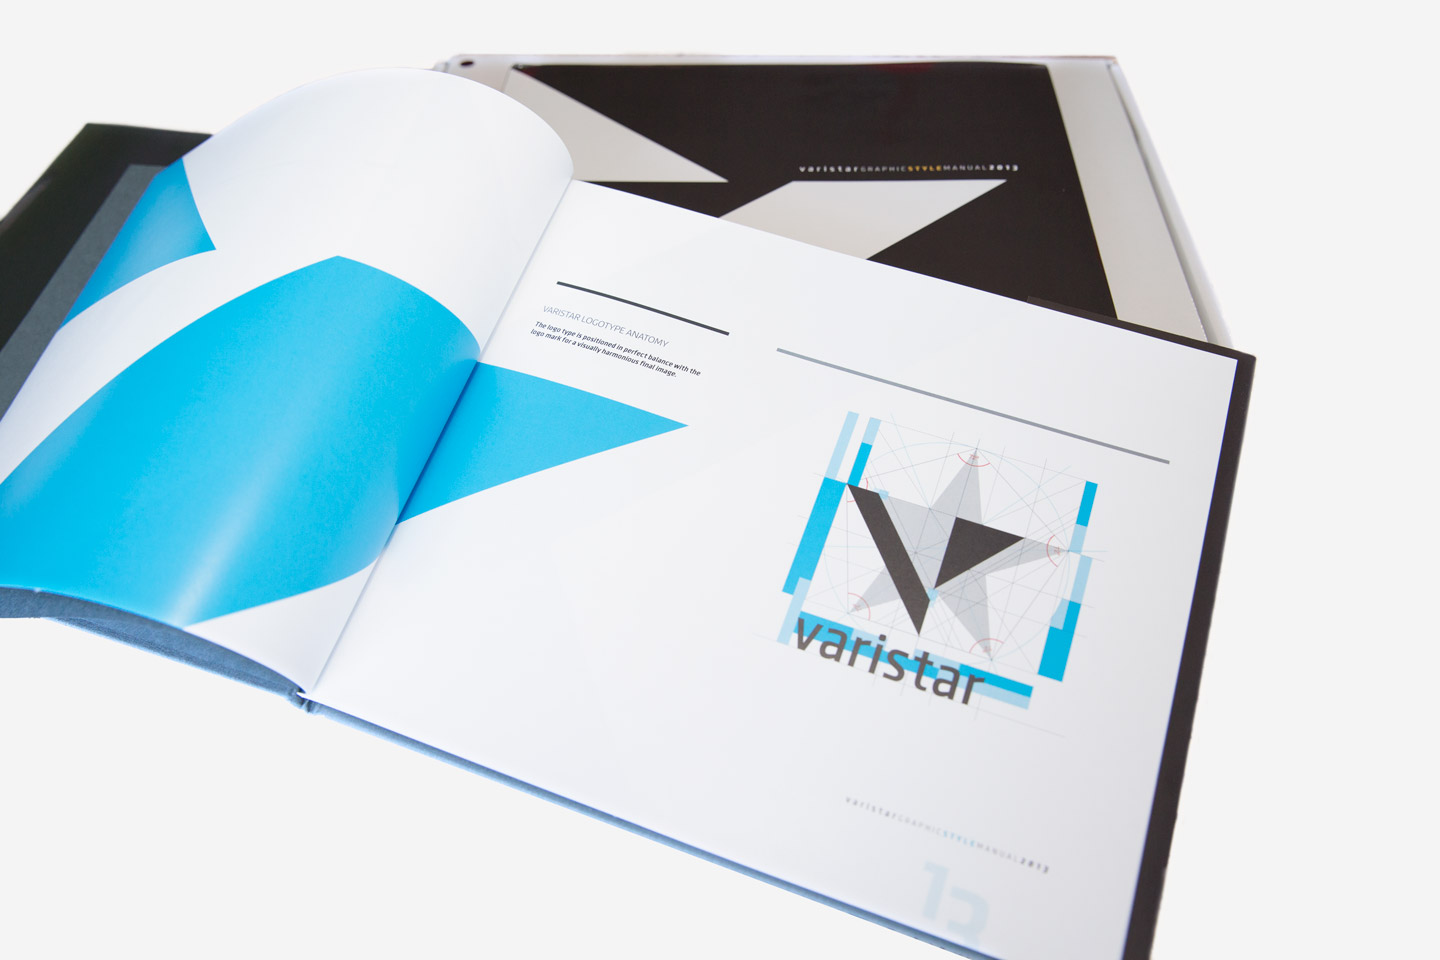 Varistar brand guideline manual open to a page showing the logo in blue and black